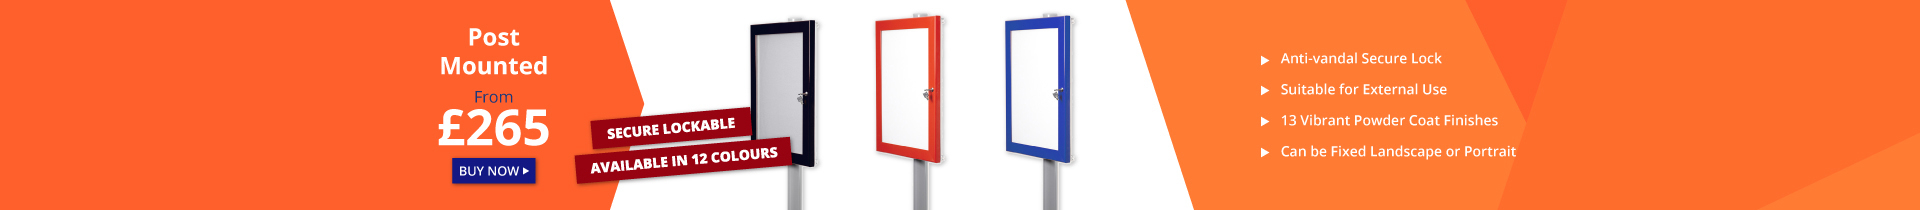 https://www.xldisplays.co.uk/products/external-notice-board-exterior-single-post-mounted.aspx